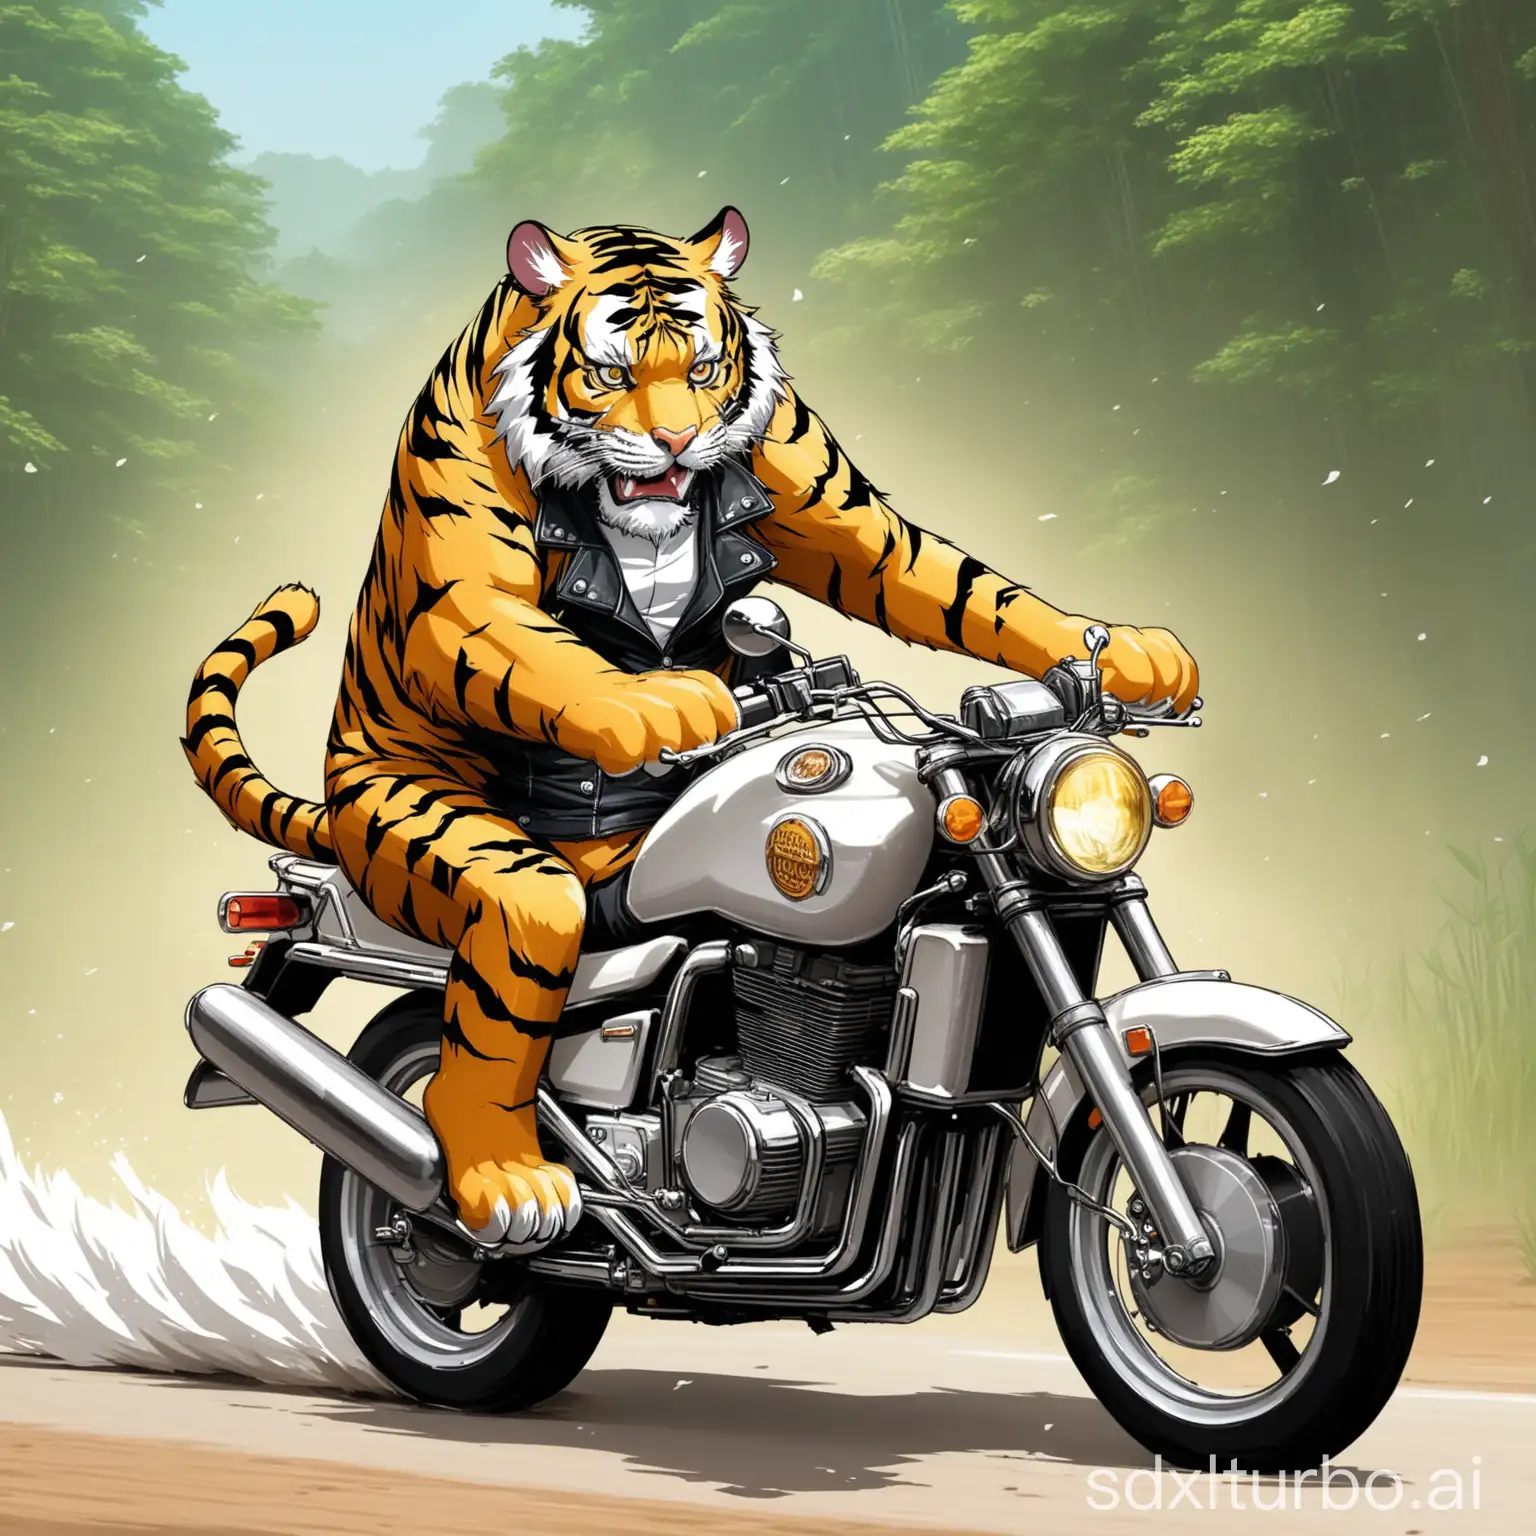 TIGER RIDING A MOTORCYCLE